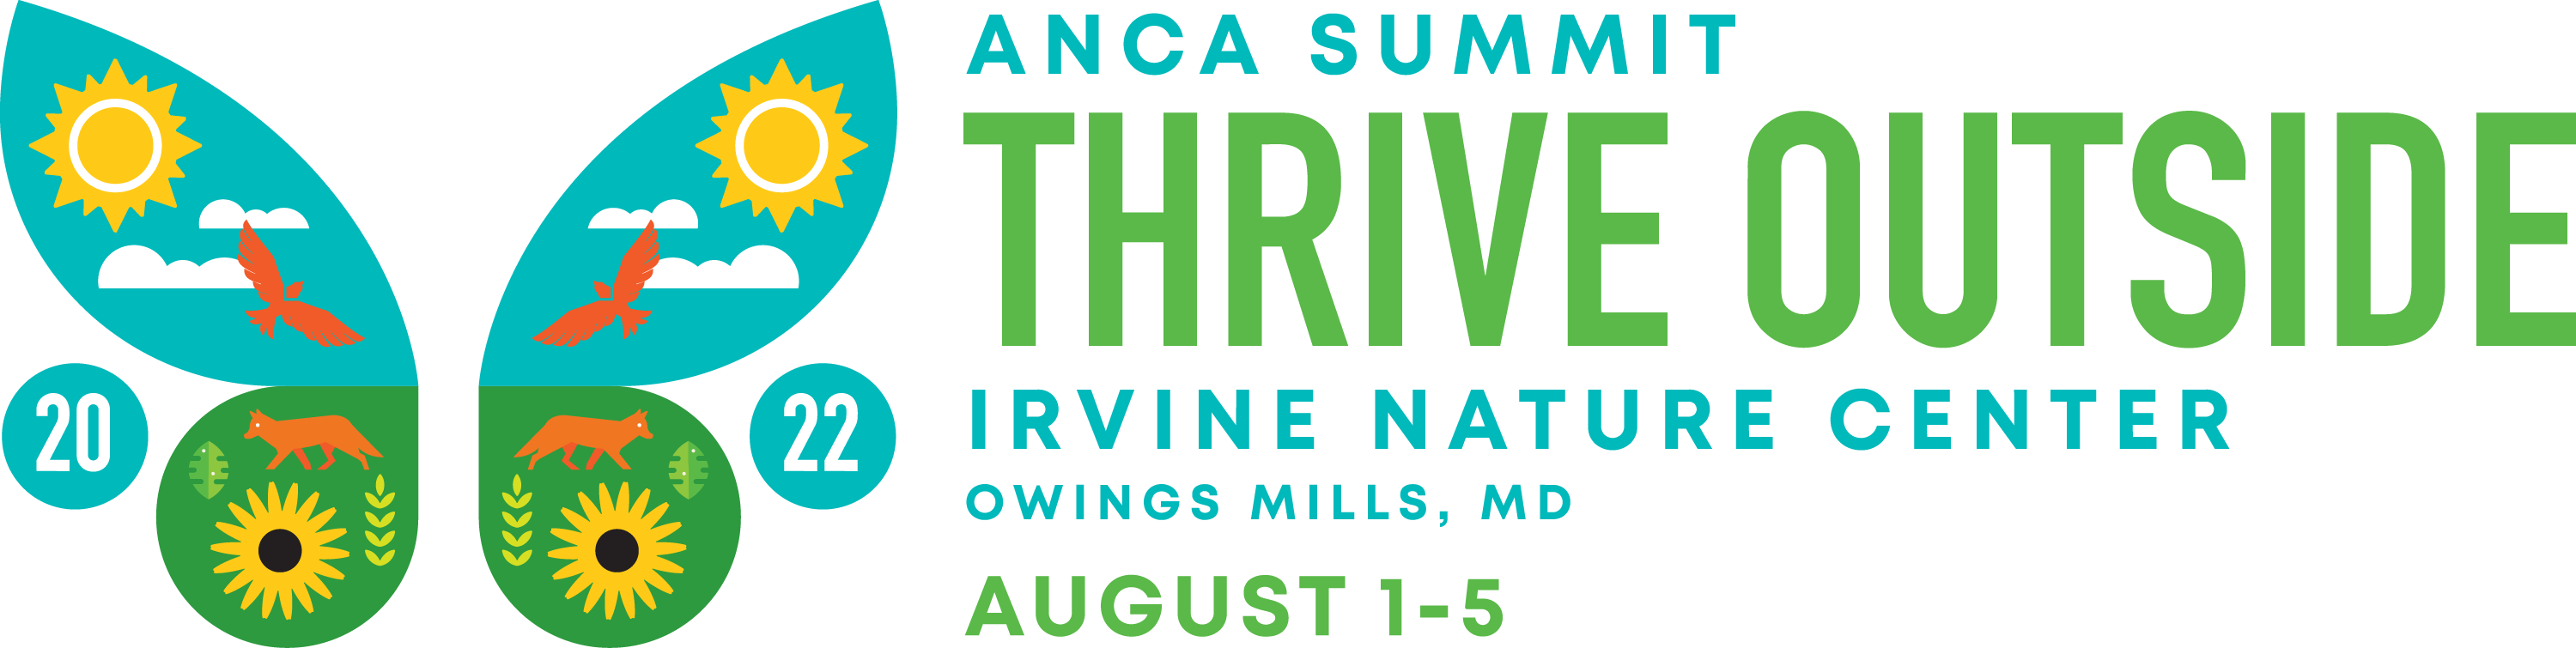 ANCA Summit | Thrive Outside | Irvine Nature Center | Owings Mills, Md | August 1-5